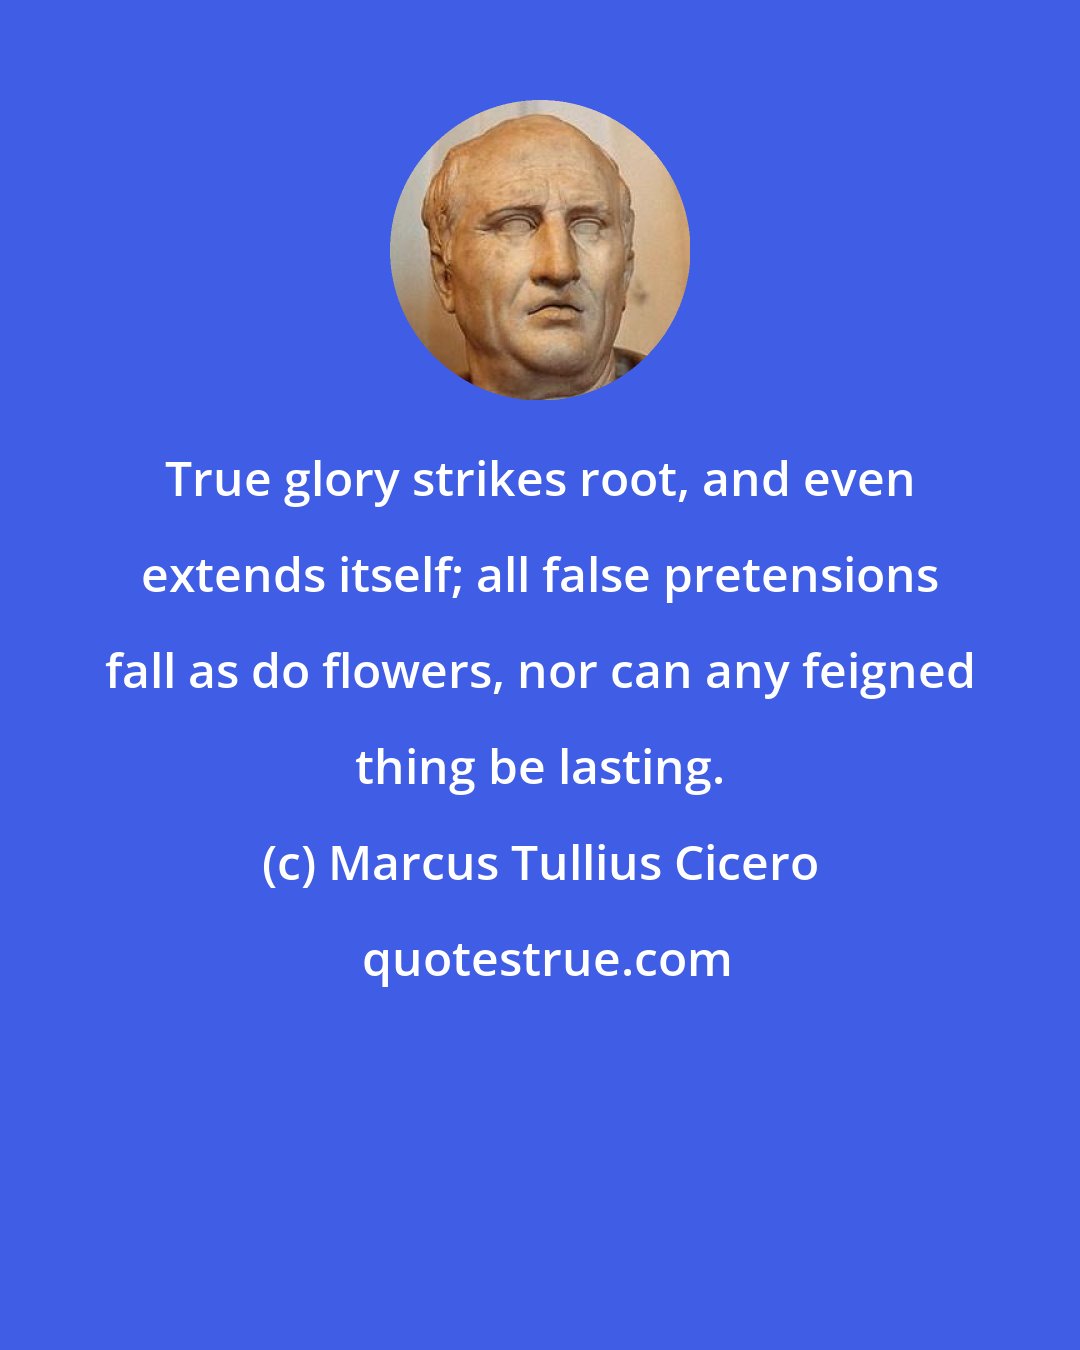 Marcus Tullius Cicero: True glory strikes root, and even extends itself; all false pretensions fall as do flowers, nor can any feigned thing be lasting.